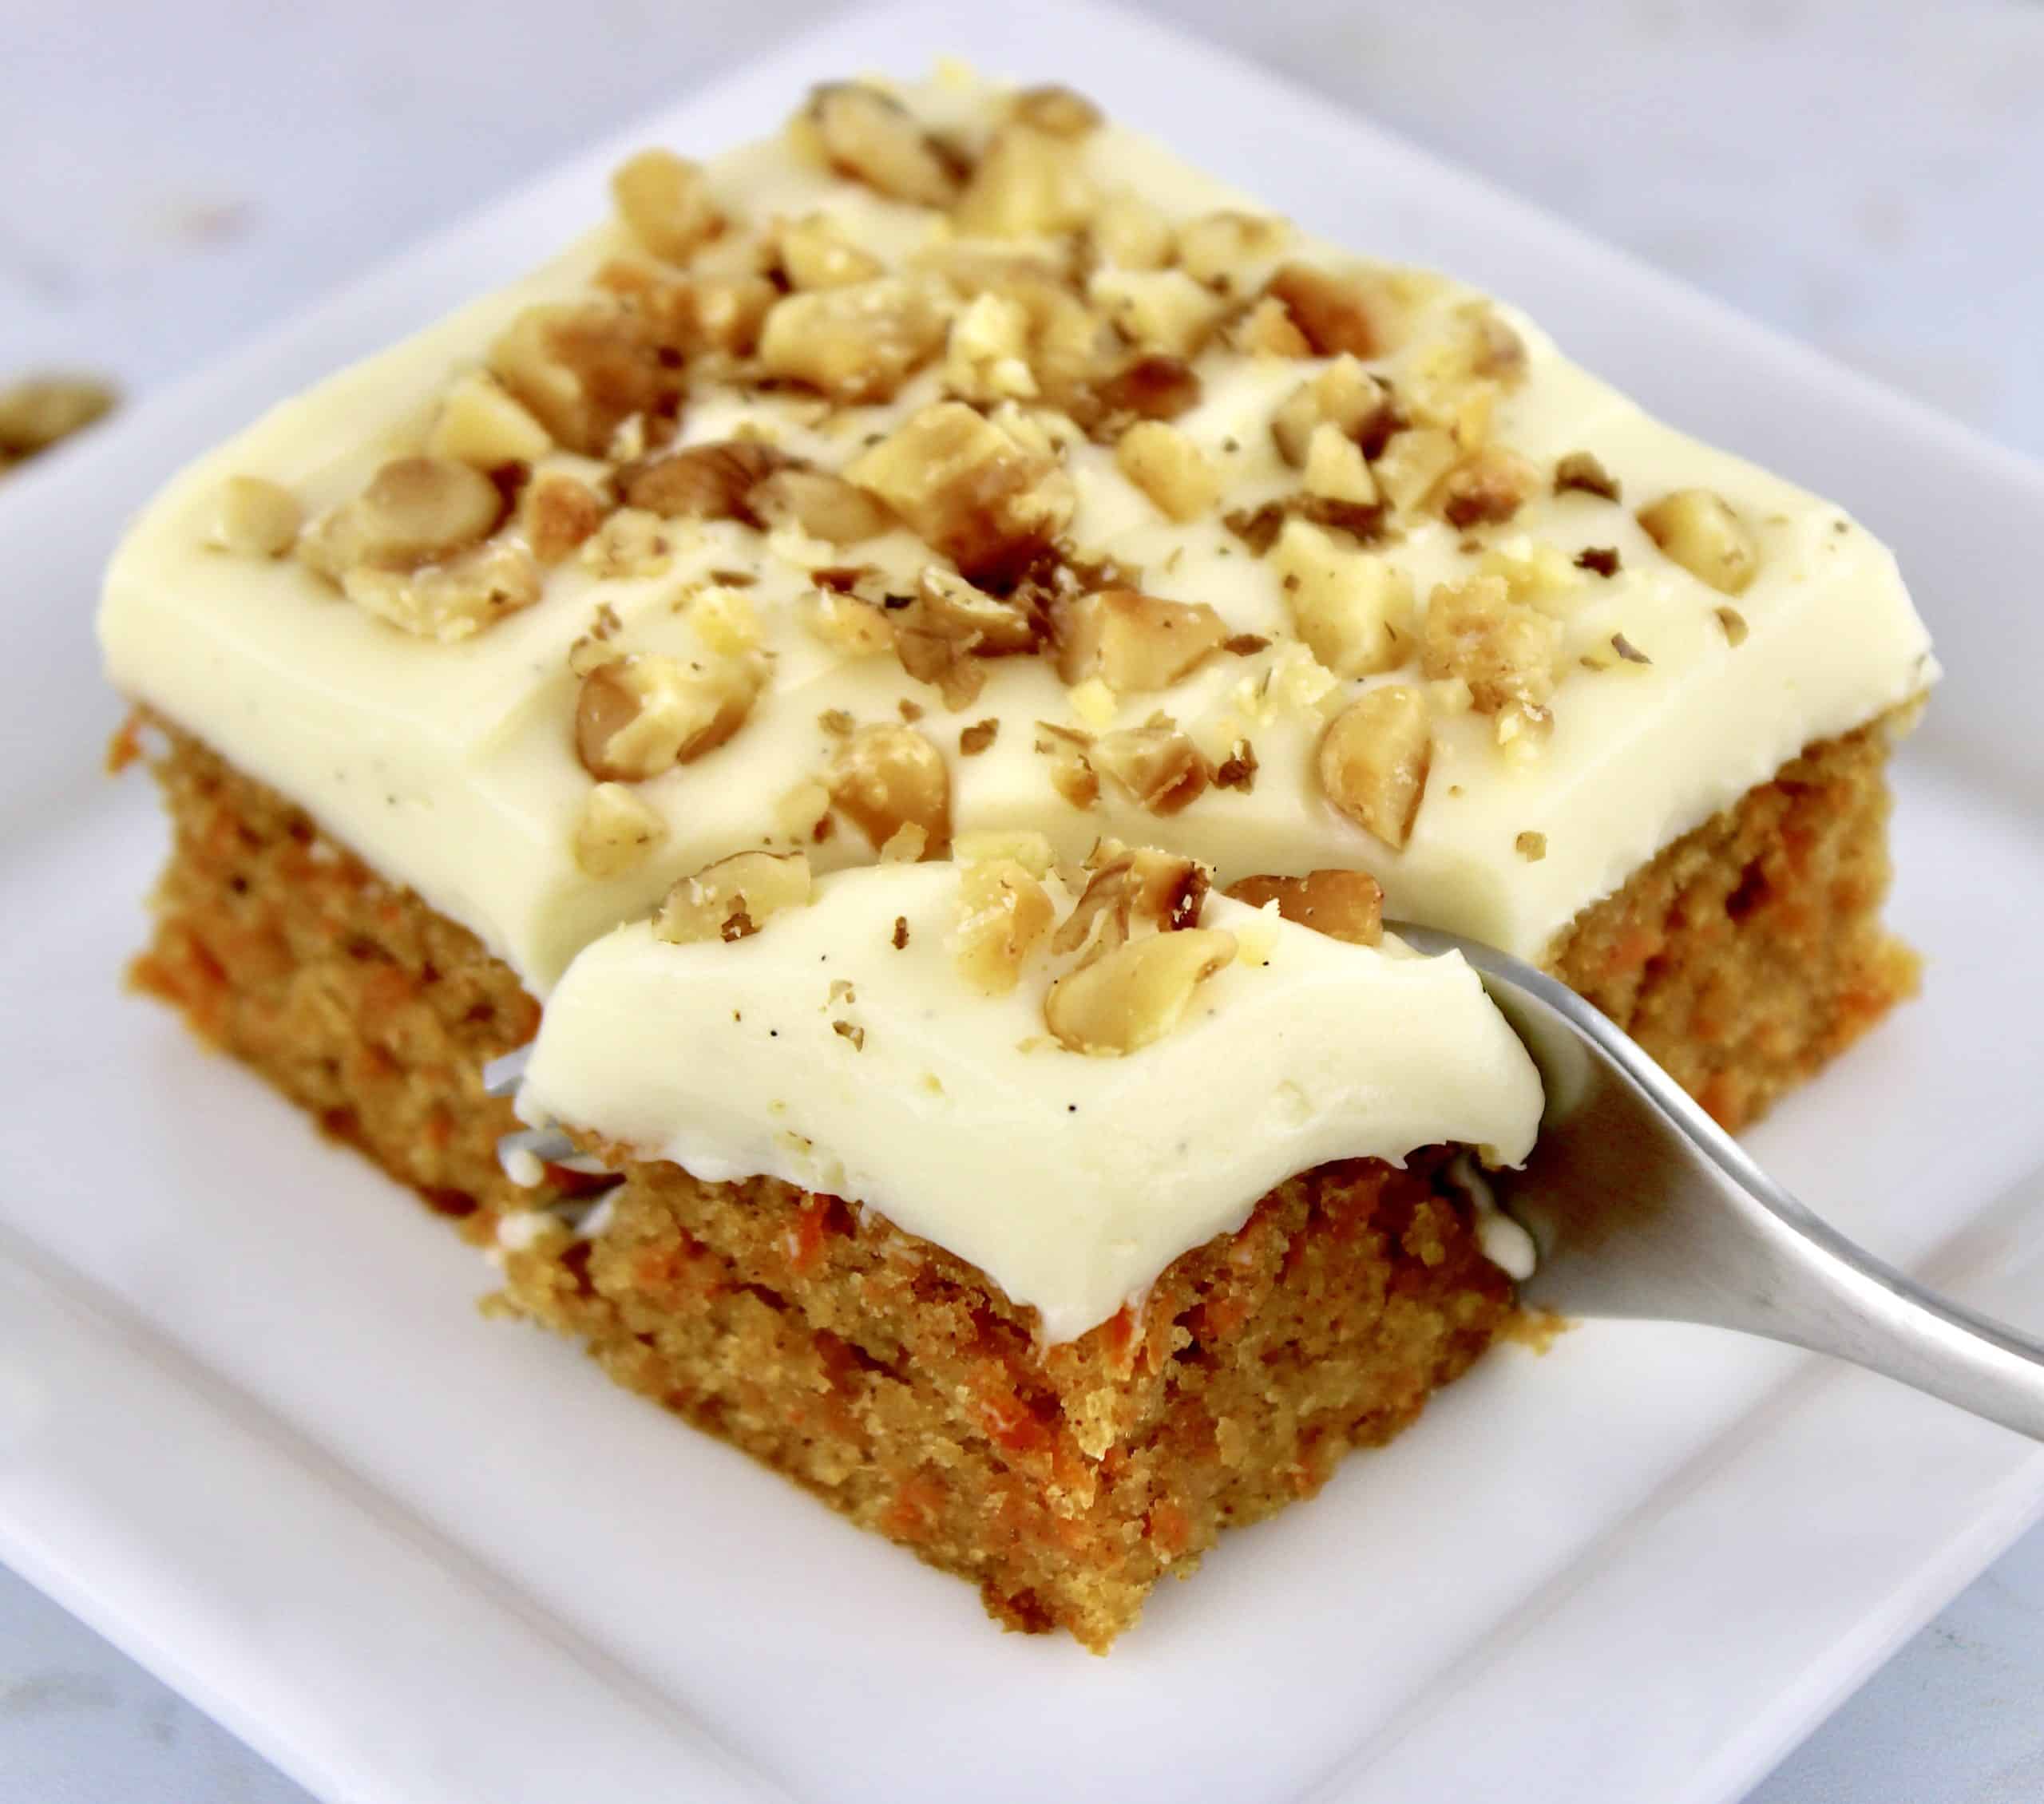 Keto Carrot Cake Bar on white square plate being cut into with fork